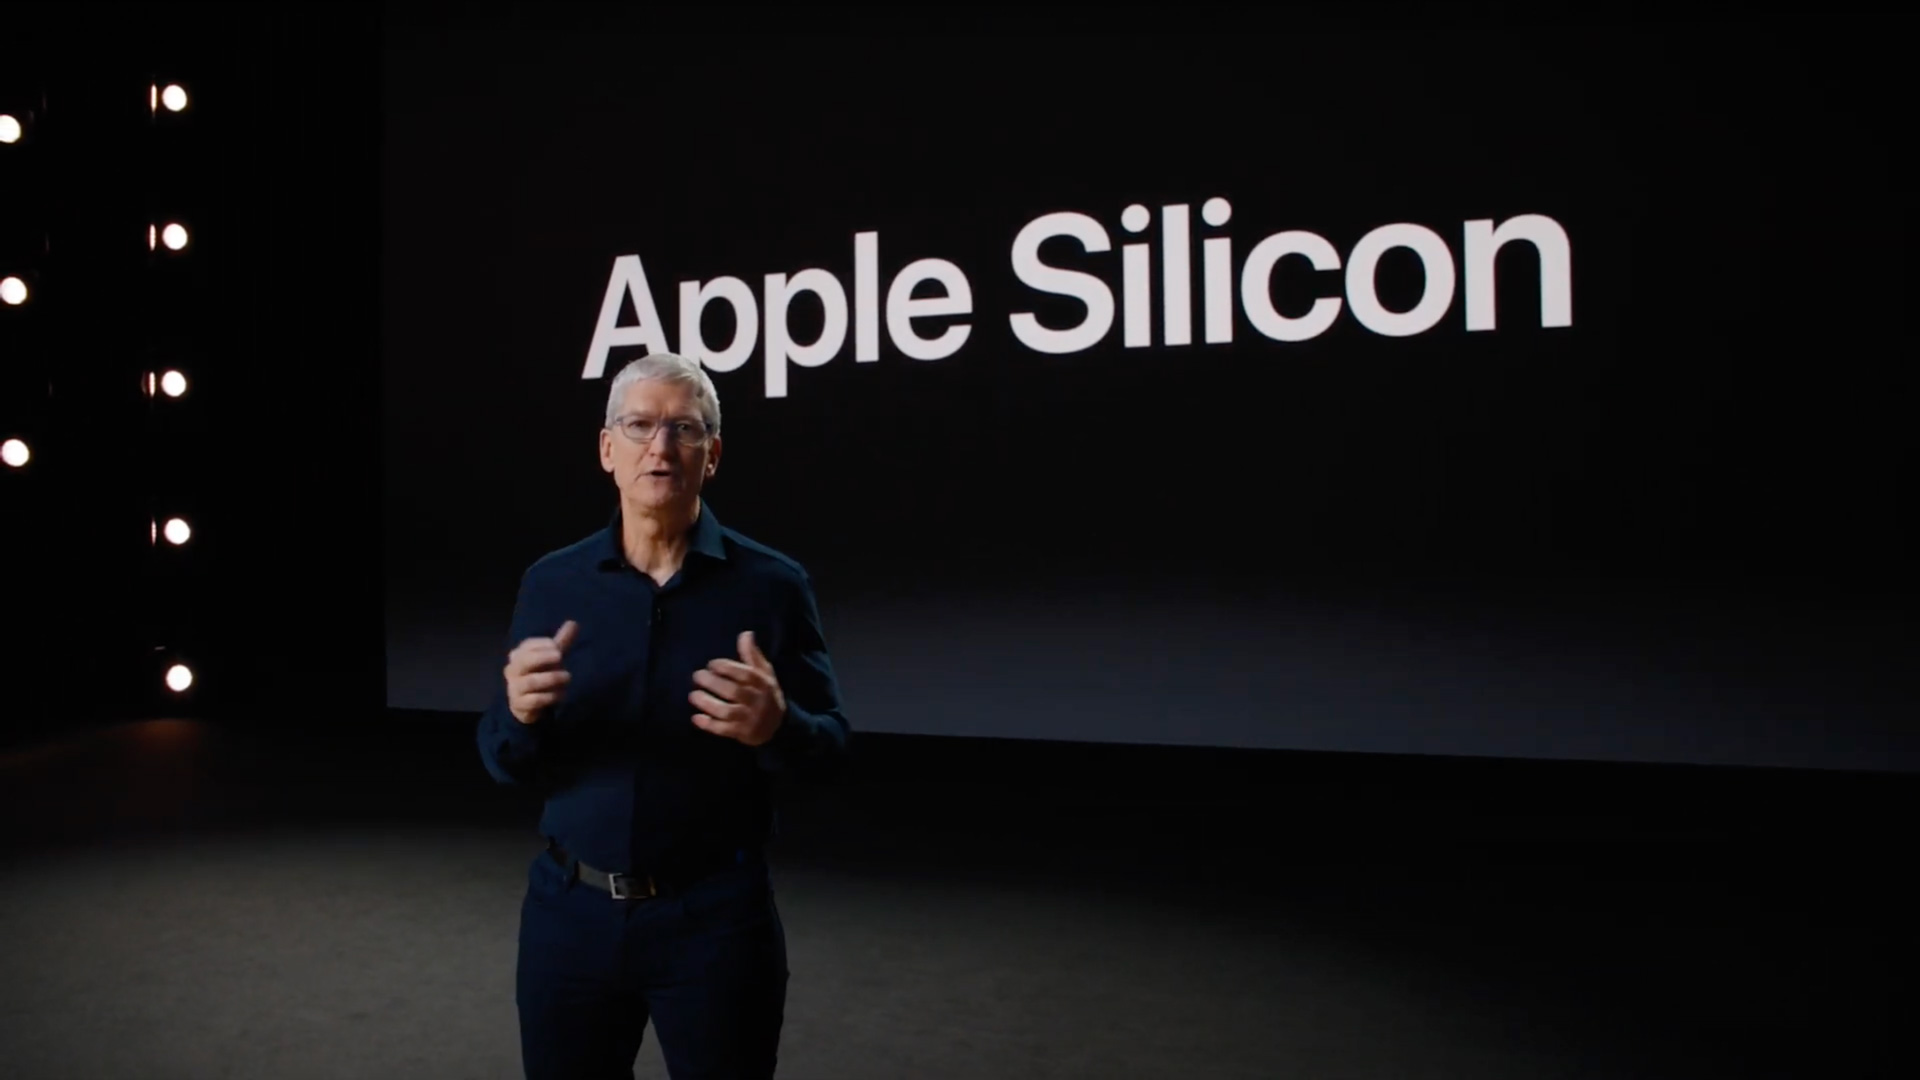 Tim Cook announcing Apple Silicon at WWDC 2020.